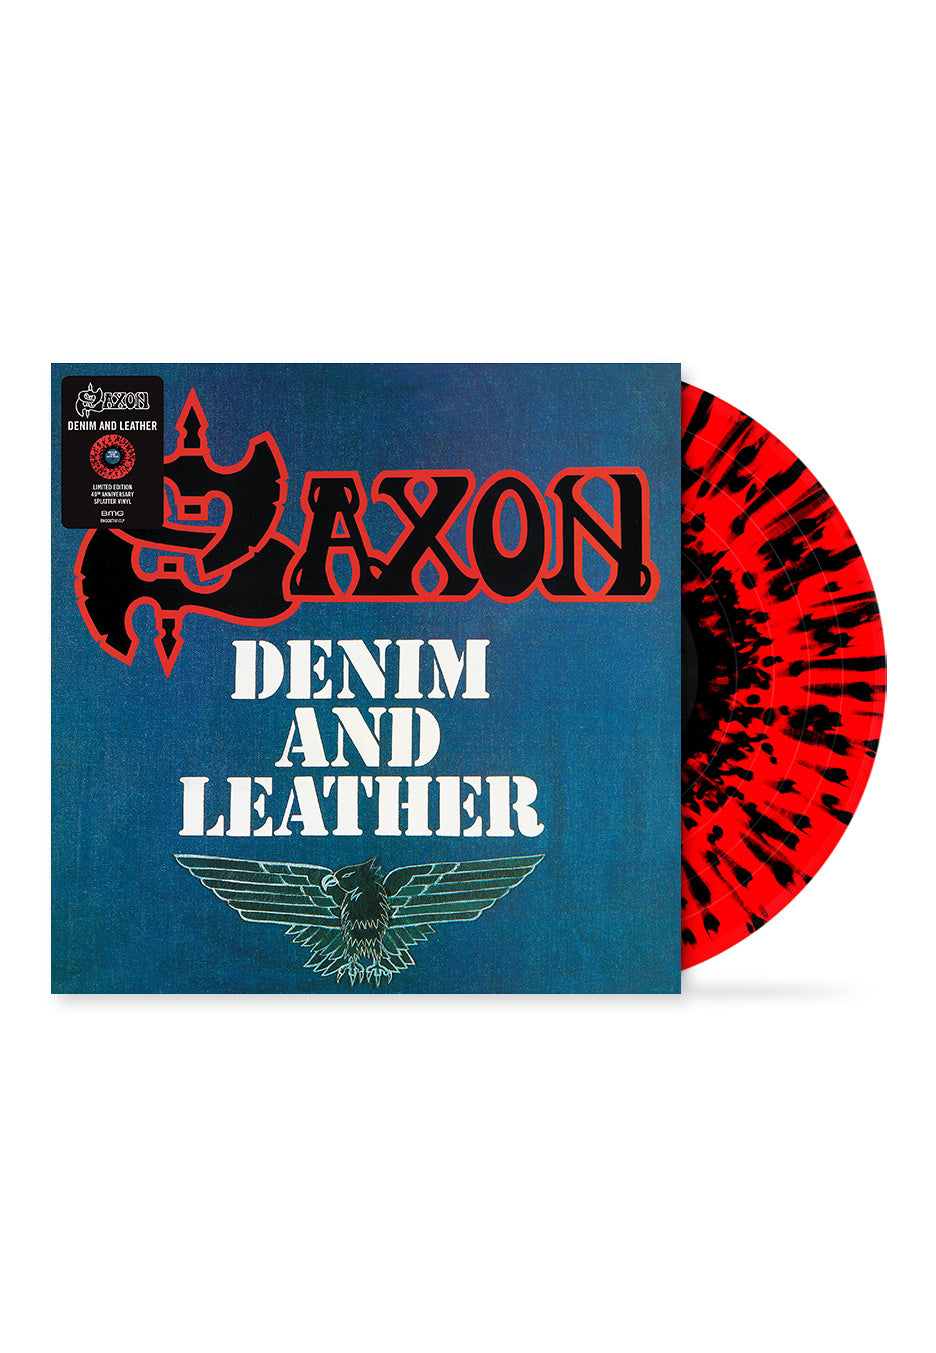 Saxon - Denim And Leather (40th Anniversary Edition) Red And Black - Splattered Vinyl